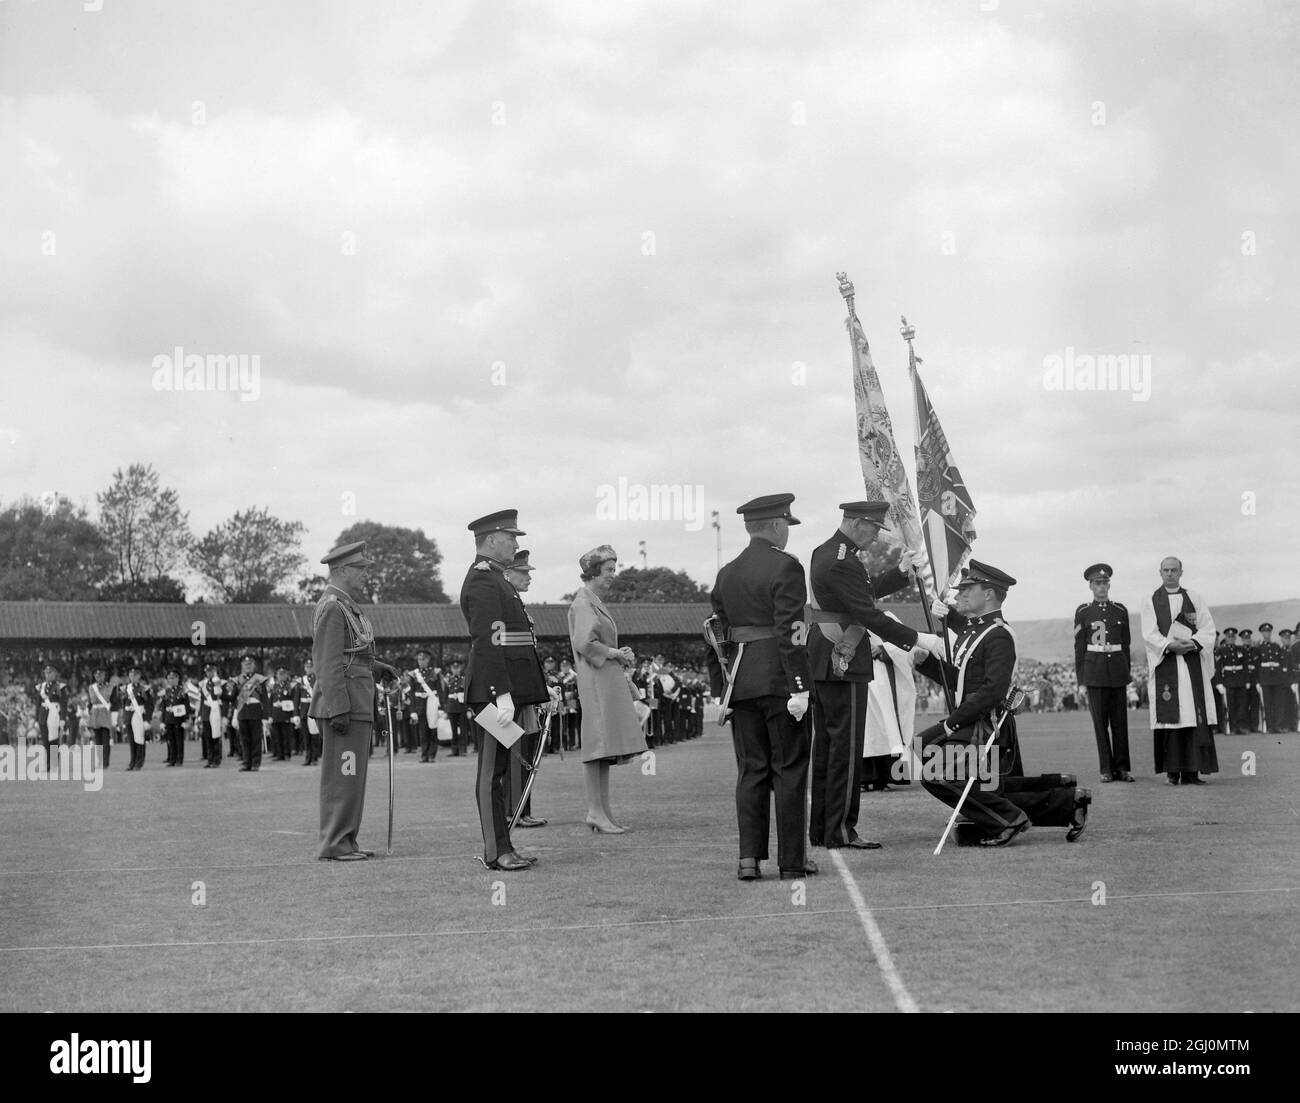 Folkestone - England - King Frederik of Denmark - Colonel in Chief of the Queen's own Buffs - presenting new colours to the Royal Regiment at a tradition filled ceremonial parade on Fokestone Cricket Ground . The colours prsented resulted from the amalgamation of the buffs ( Royal East Kent Regiment ) and the Queen's own Royal West Kent Regiment in March 1961 - watching to the left is Princess Marina - Colonel of the Regiment - 23rd June 1962 ©TopFoto Stock Photo